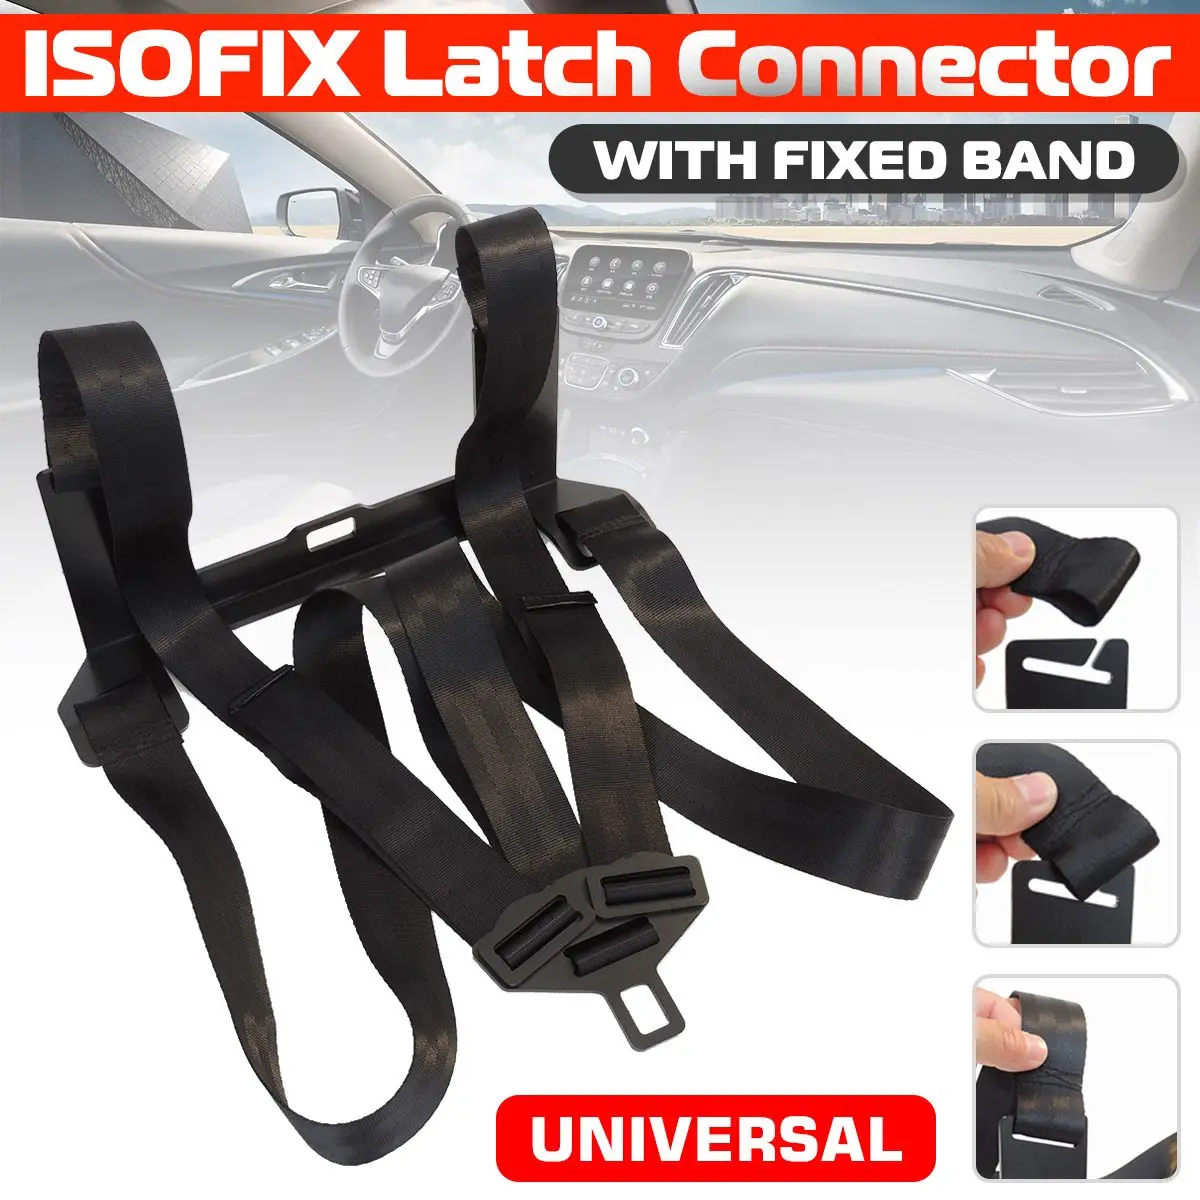 

Universal Car Seat ISOFIX Latch Belt Interface Guide Grooves Connector Steel Seat Bracket For Baby Child Safety With Fixed Band